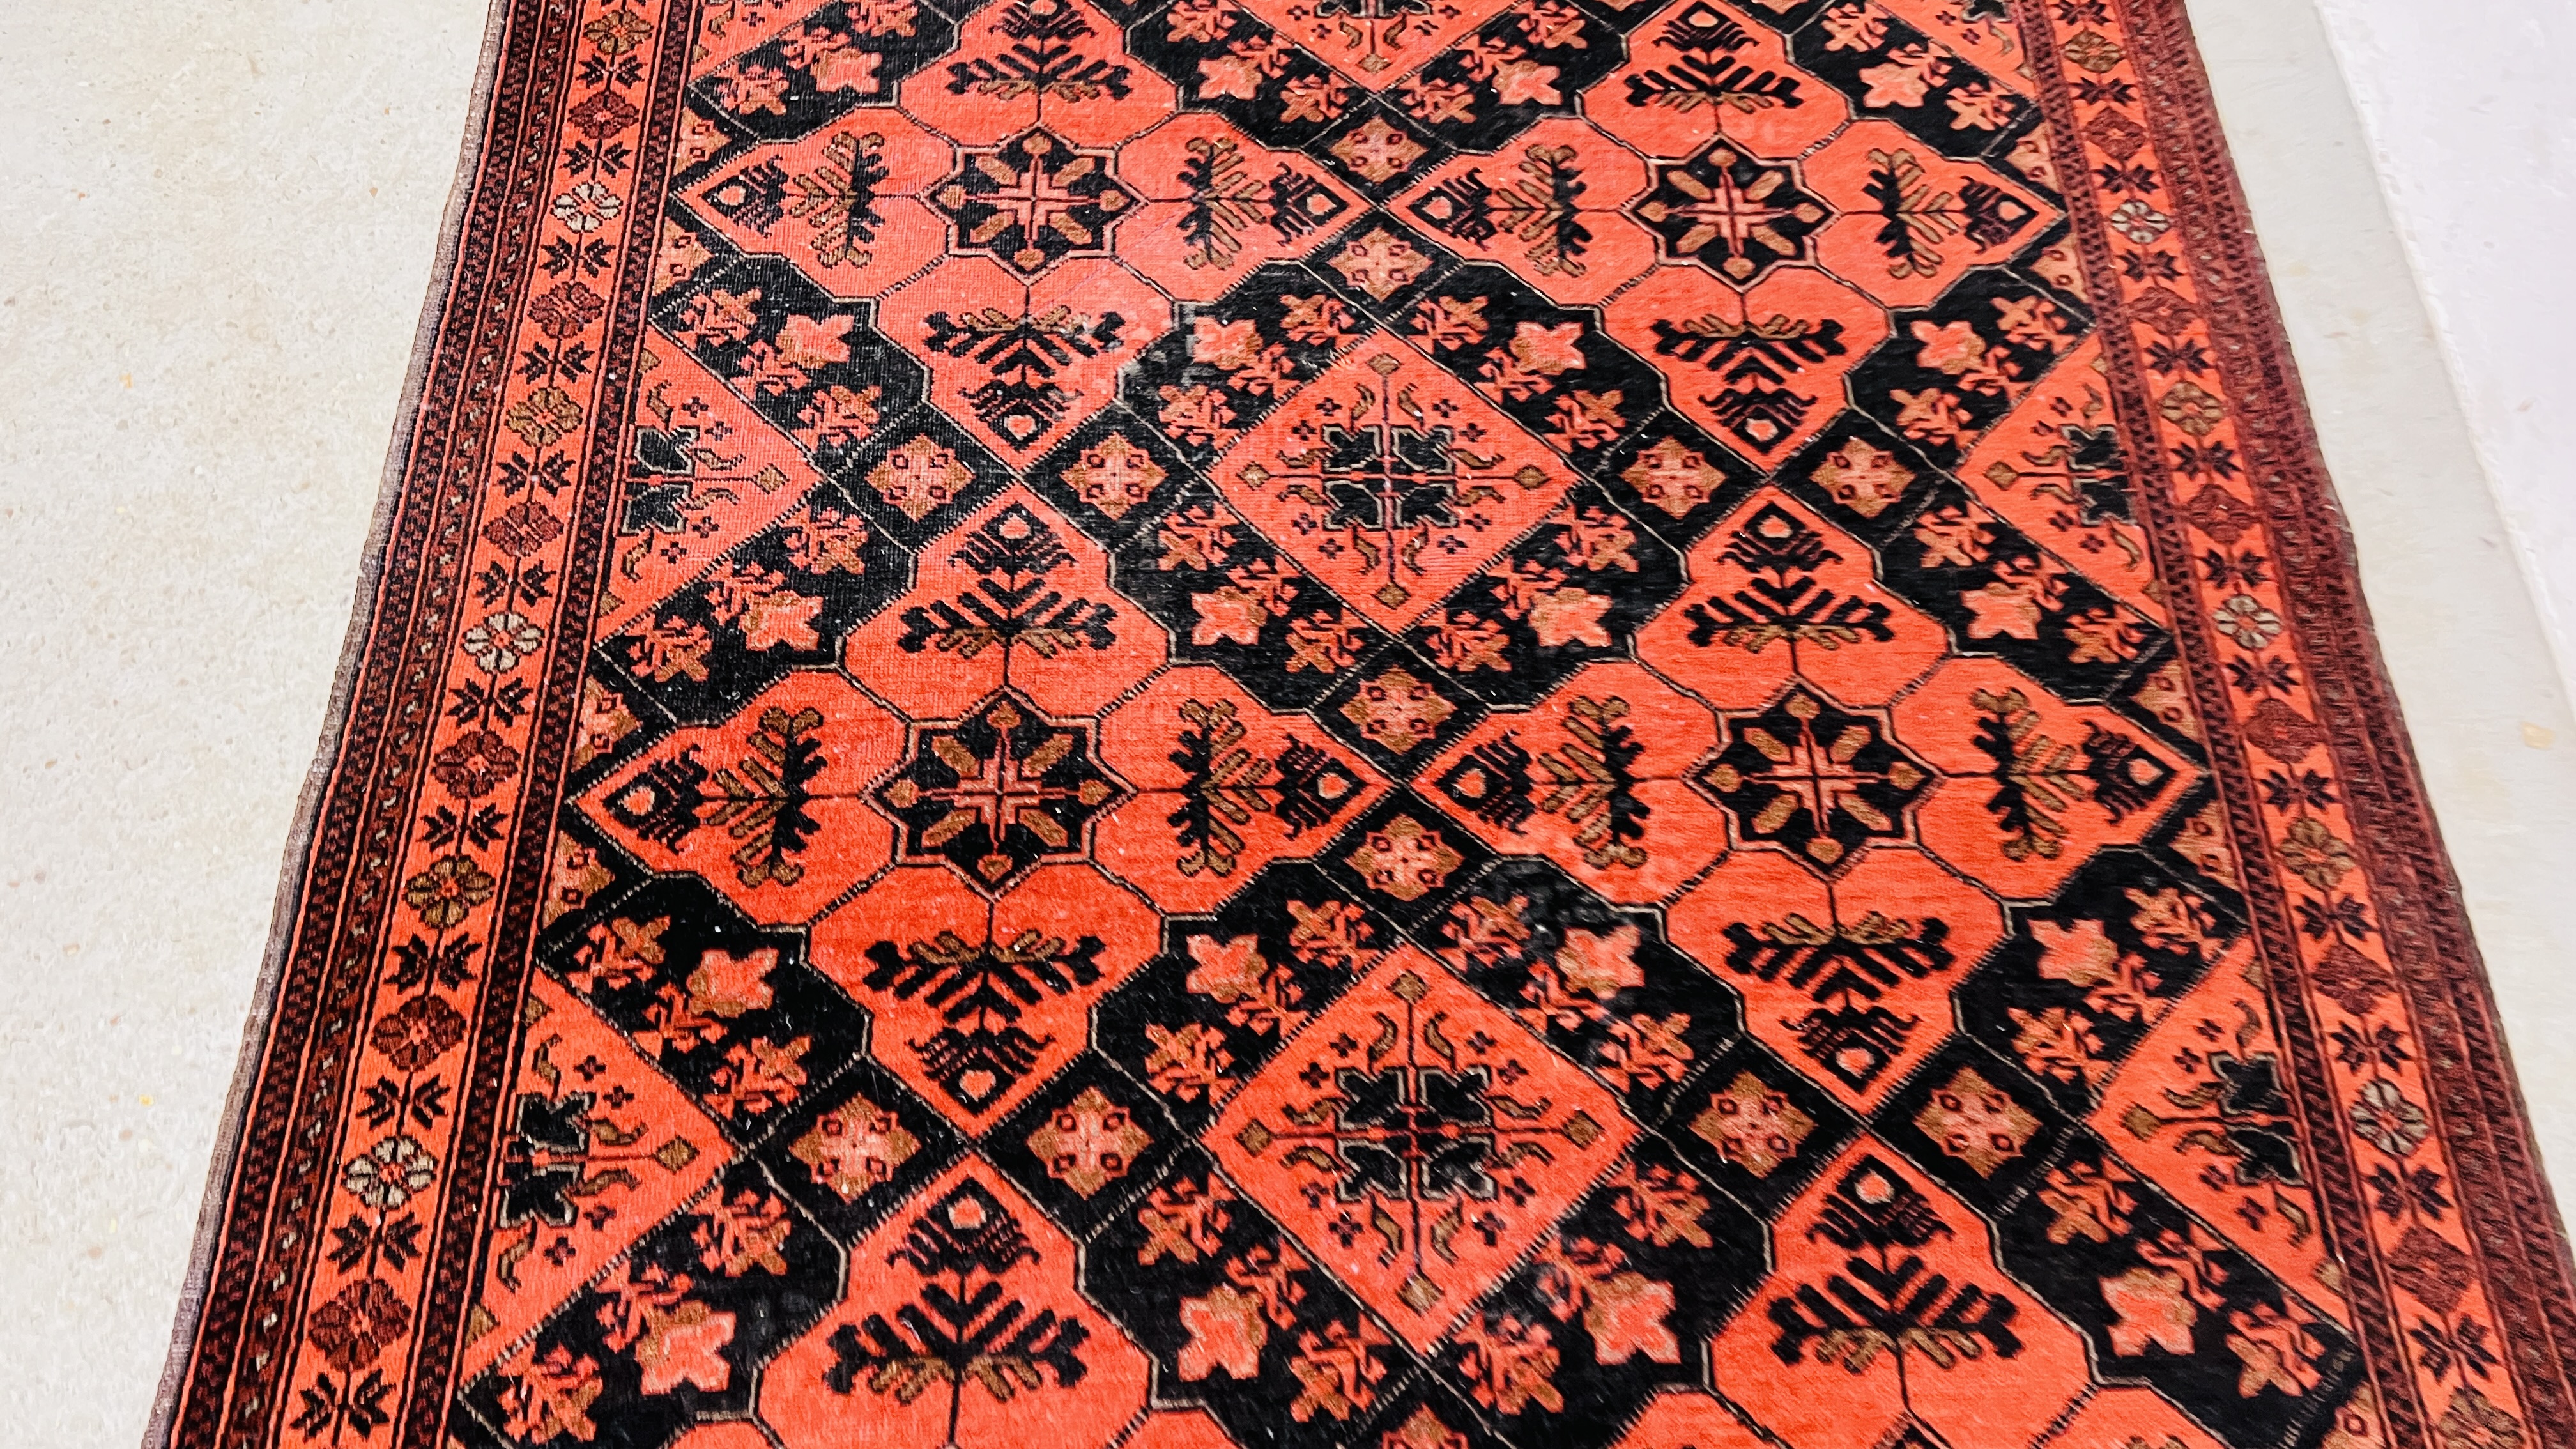 A RED PATTERNED EASTERN RUG. - Image 4 of 6